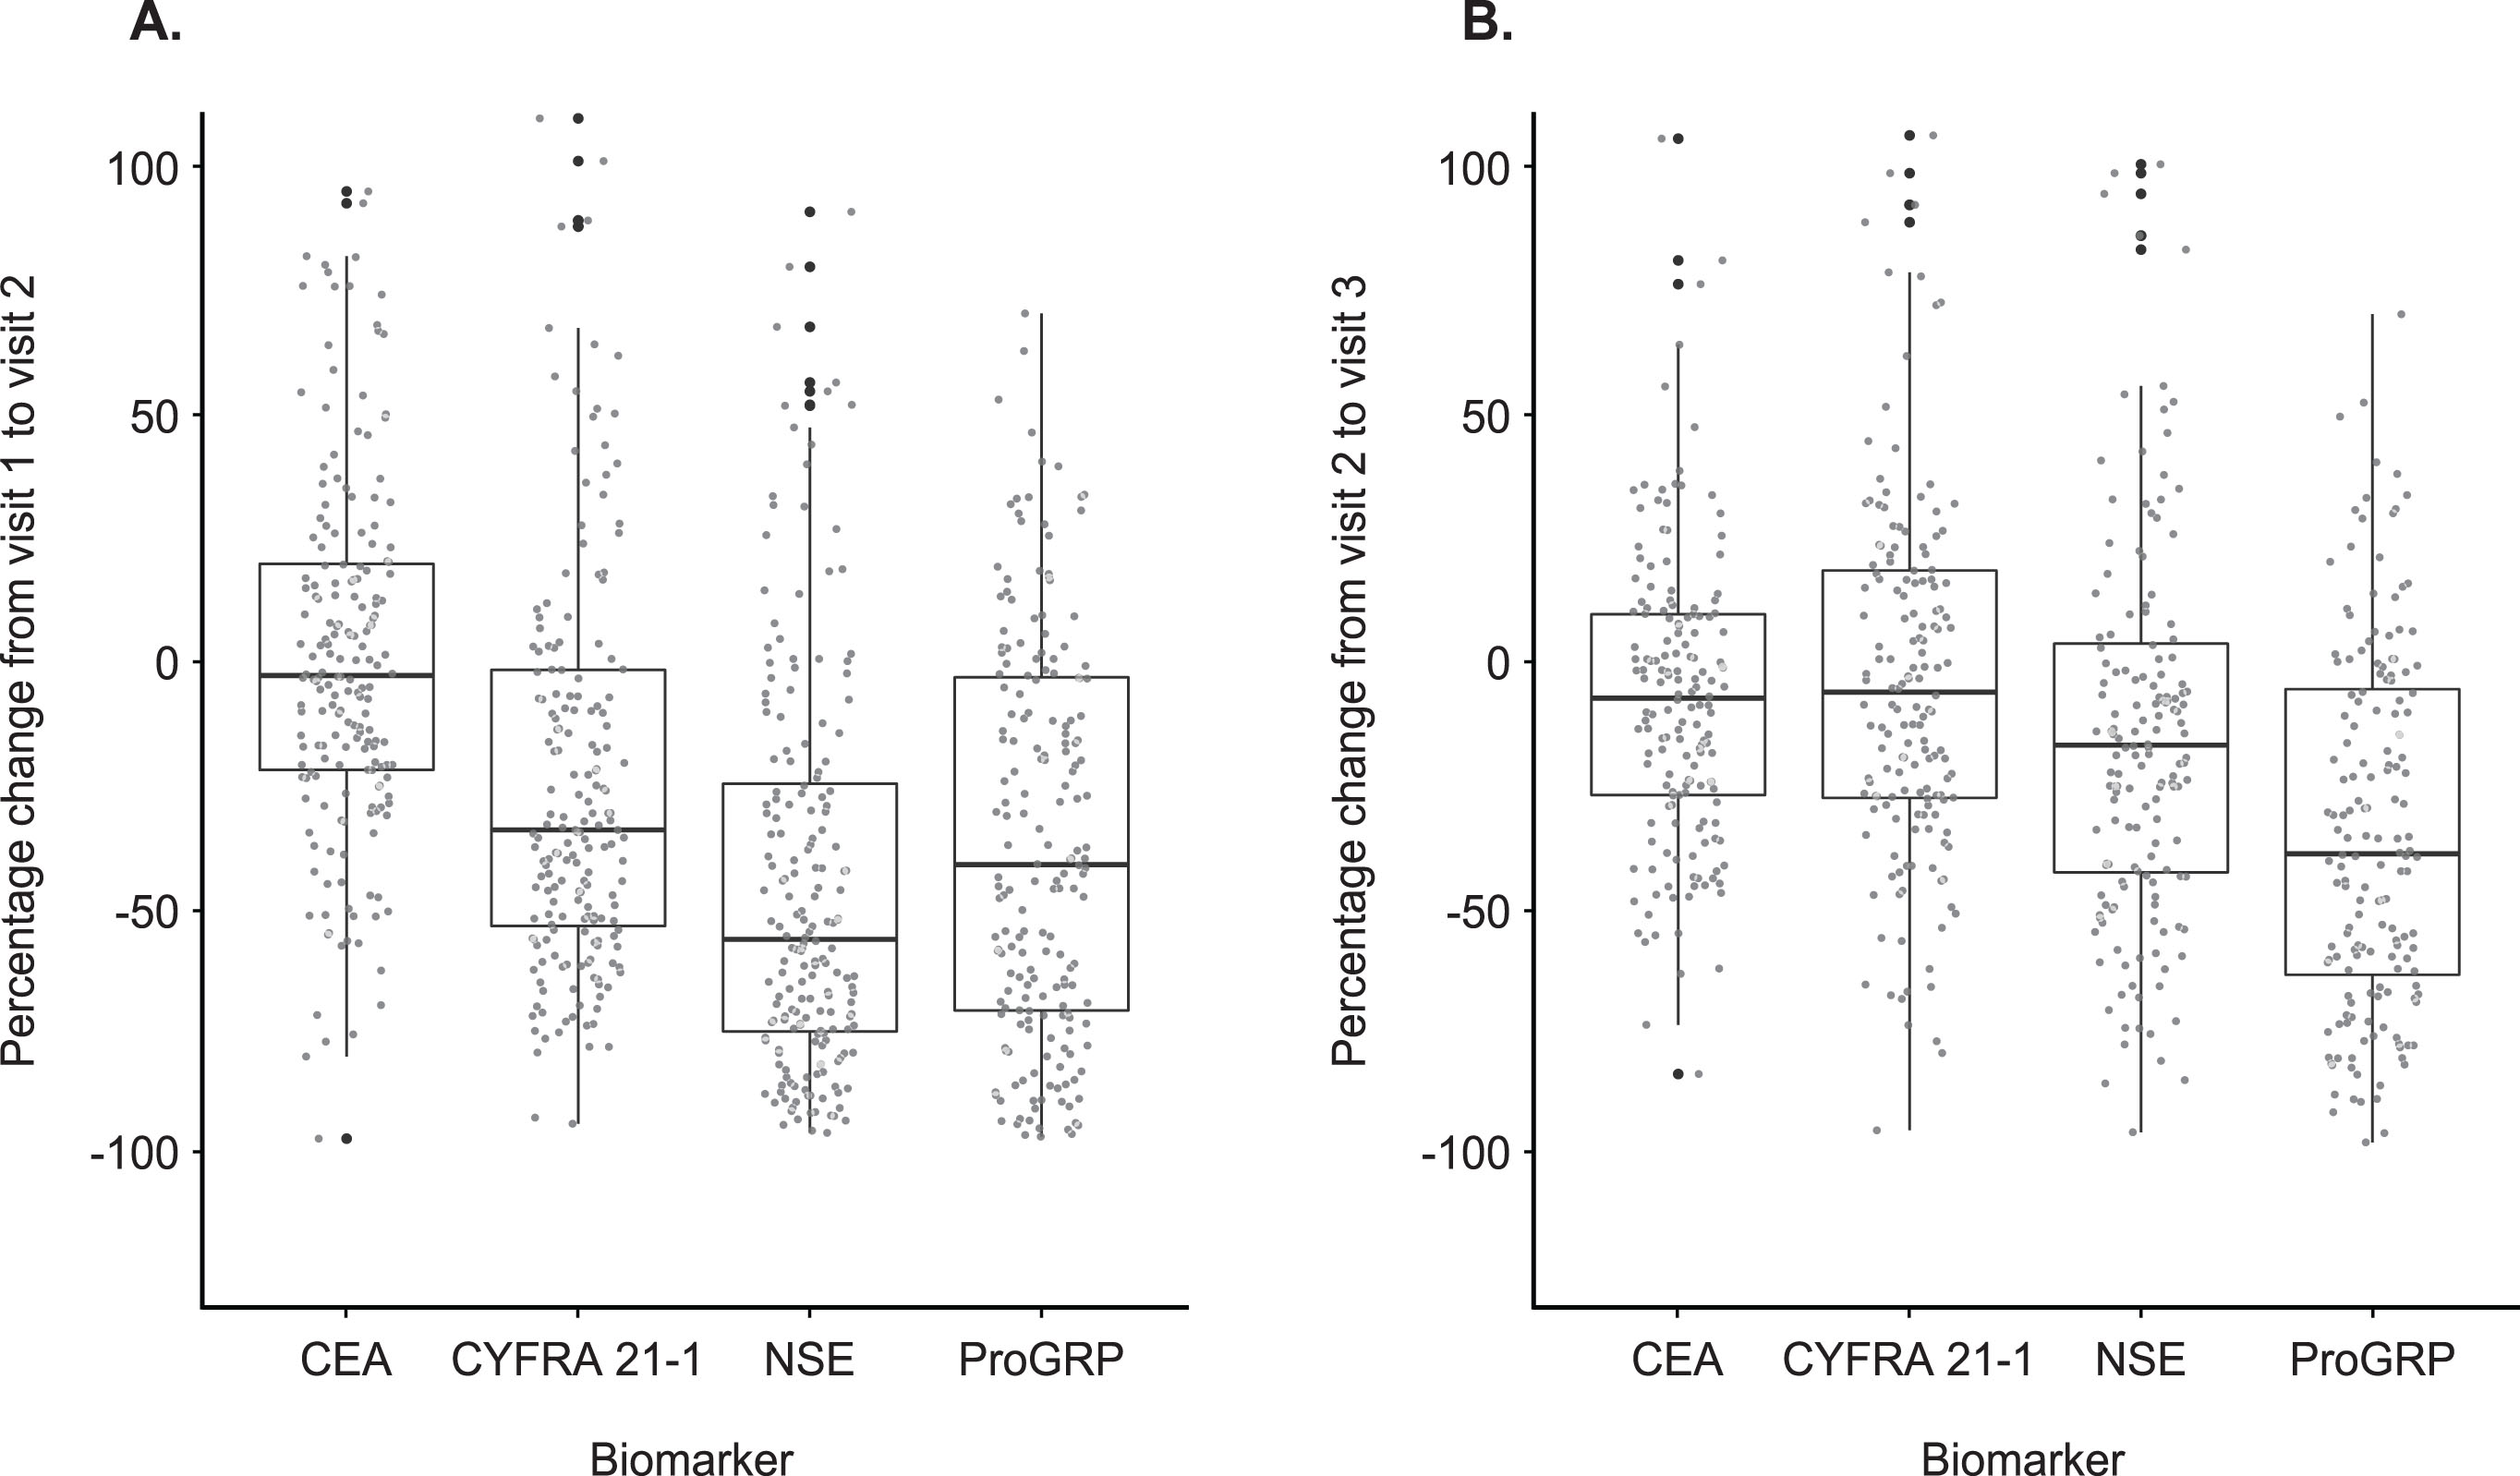 Relative changes in tumor biomarker levels. Percent change in ProGRP, NSE, CYFRA 21-1 and CEA from (A) pre-treatment (visit 1) to after the first treatment cycle (visit 2) and (B) from after the first treatment cycle to after the second treatment cycle (visits 2 to 3).